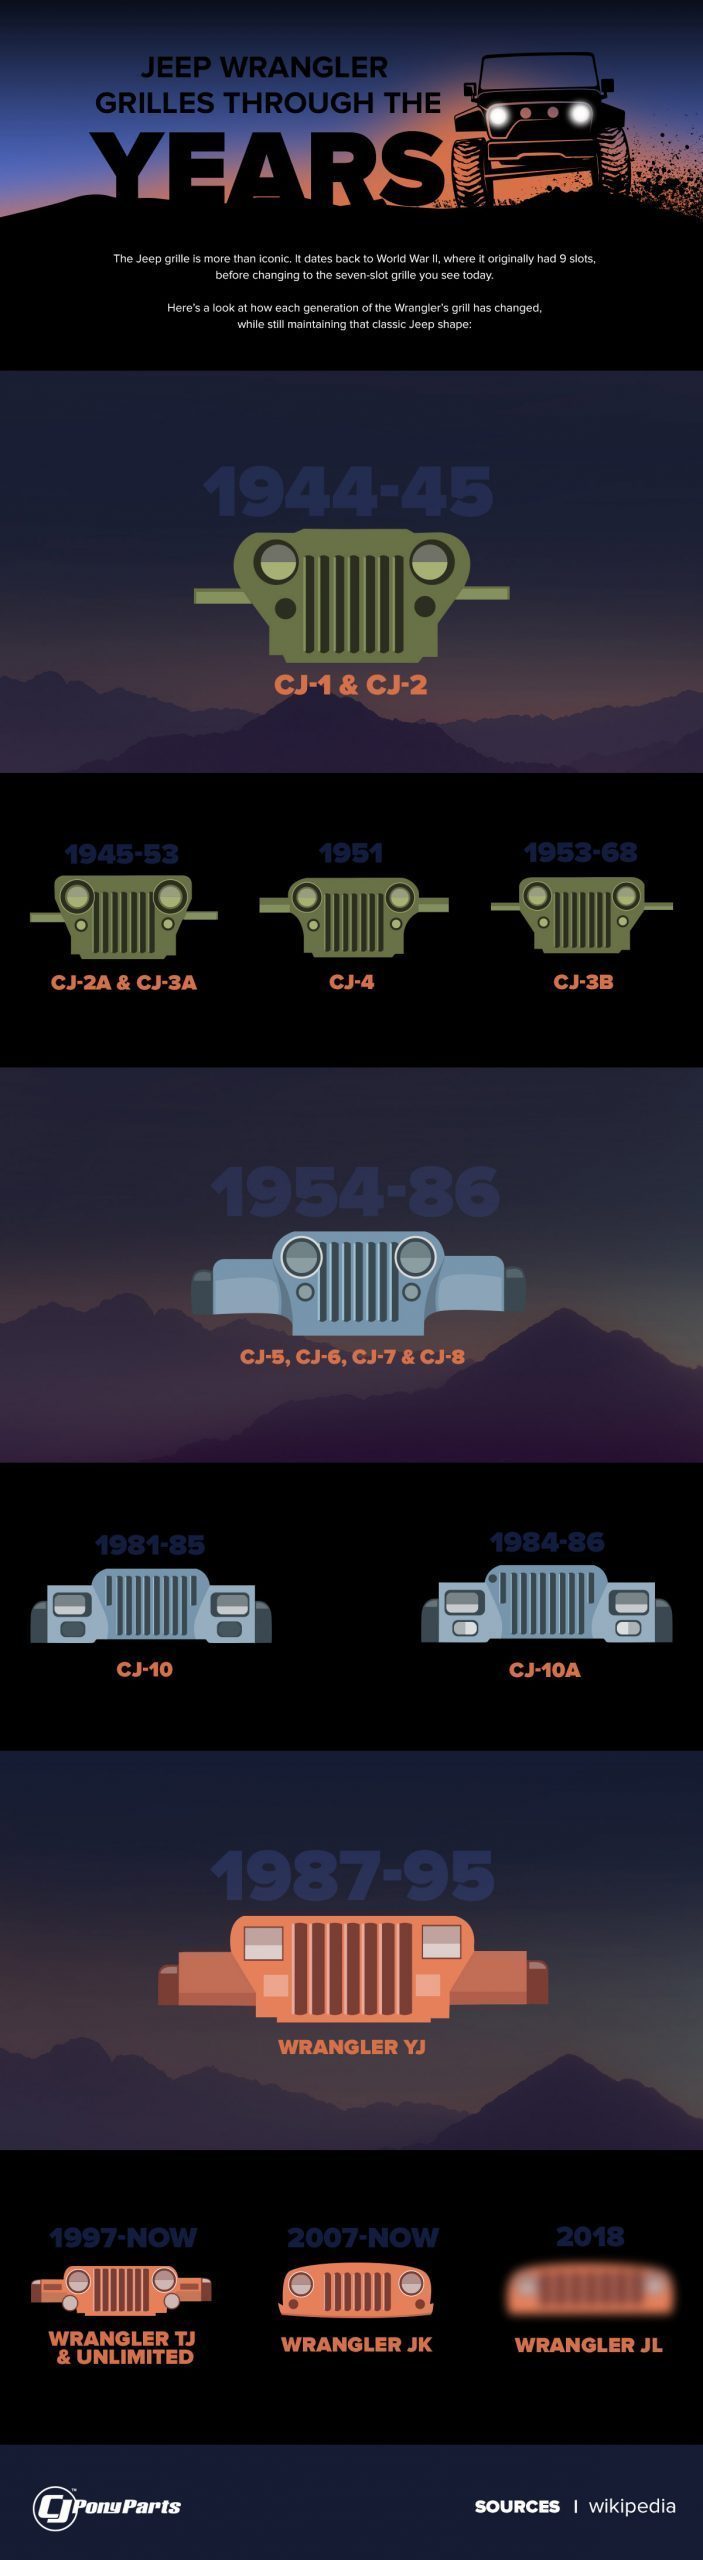 jeep-wrangler-grilles-through-the-years-infographic-1018843-scaled-2083737-4405631